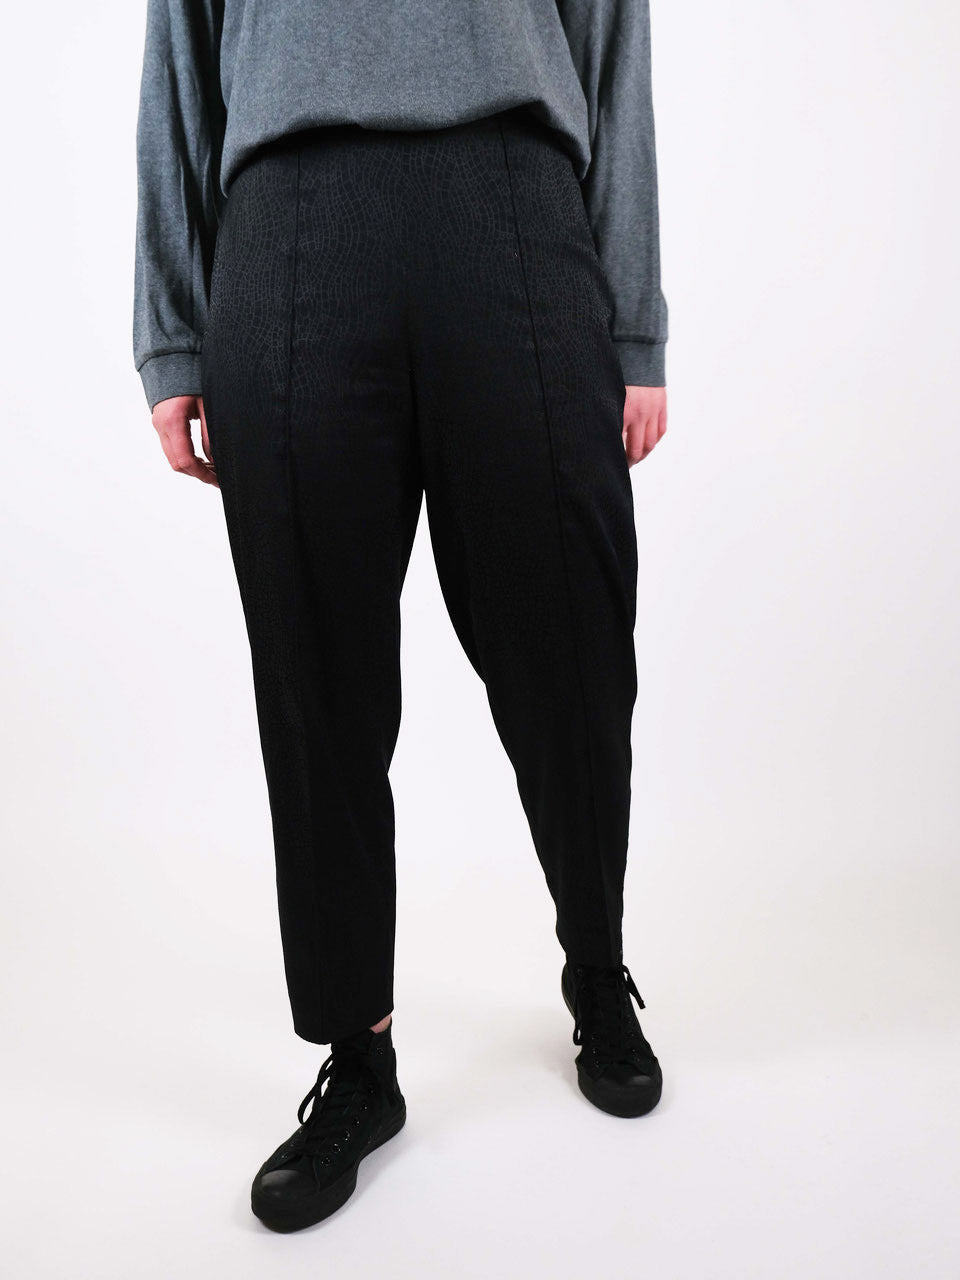 Black structured trousers